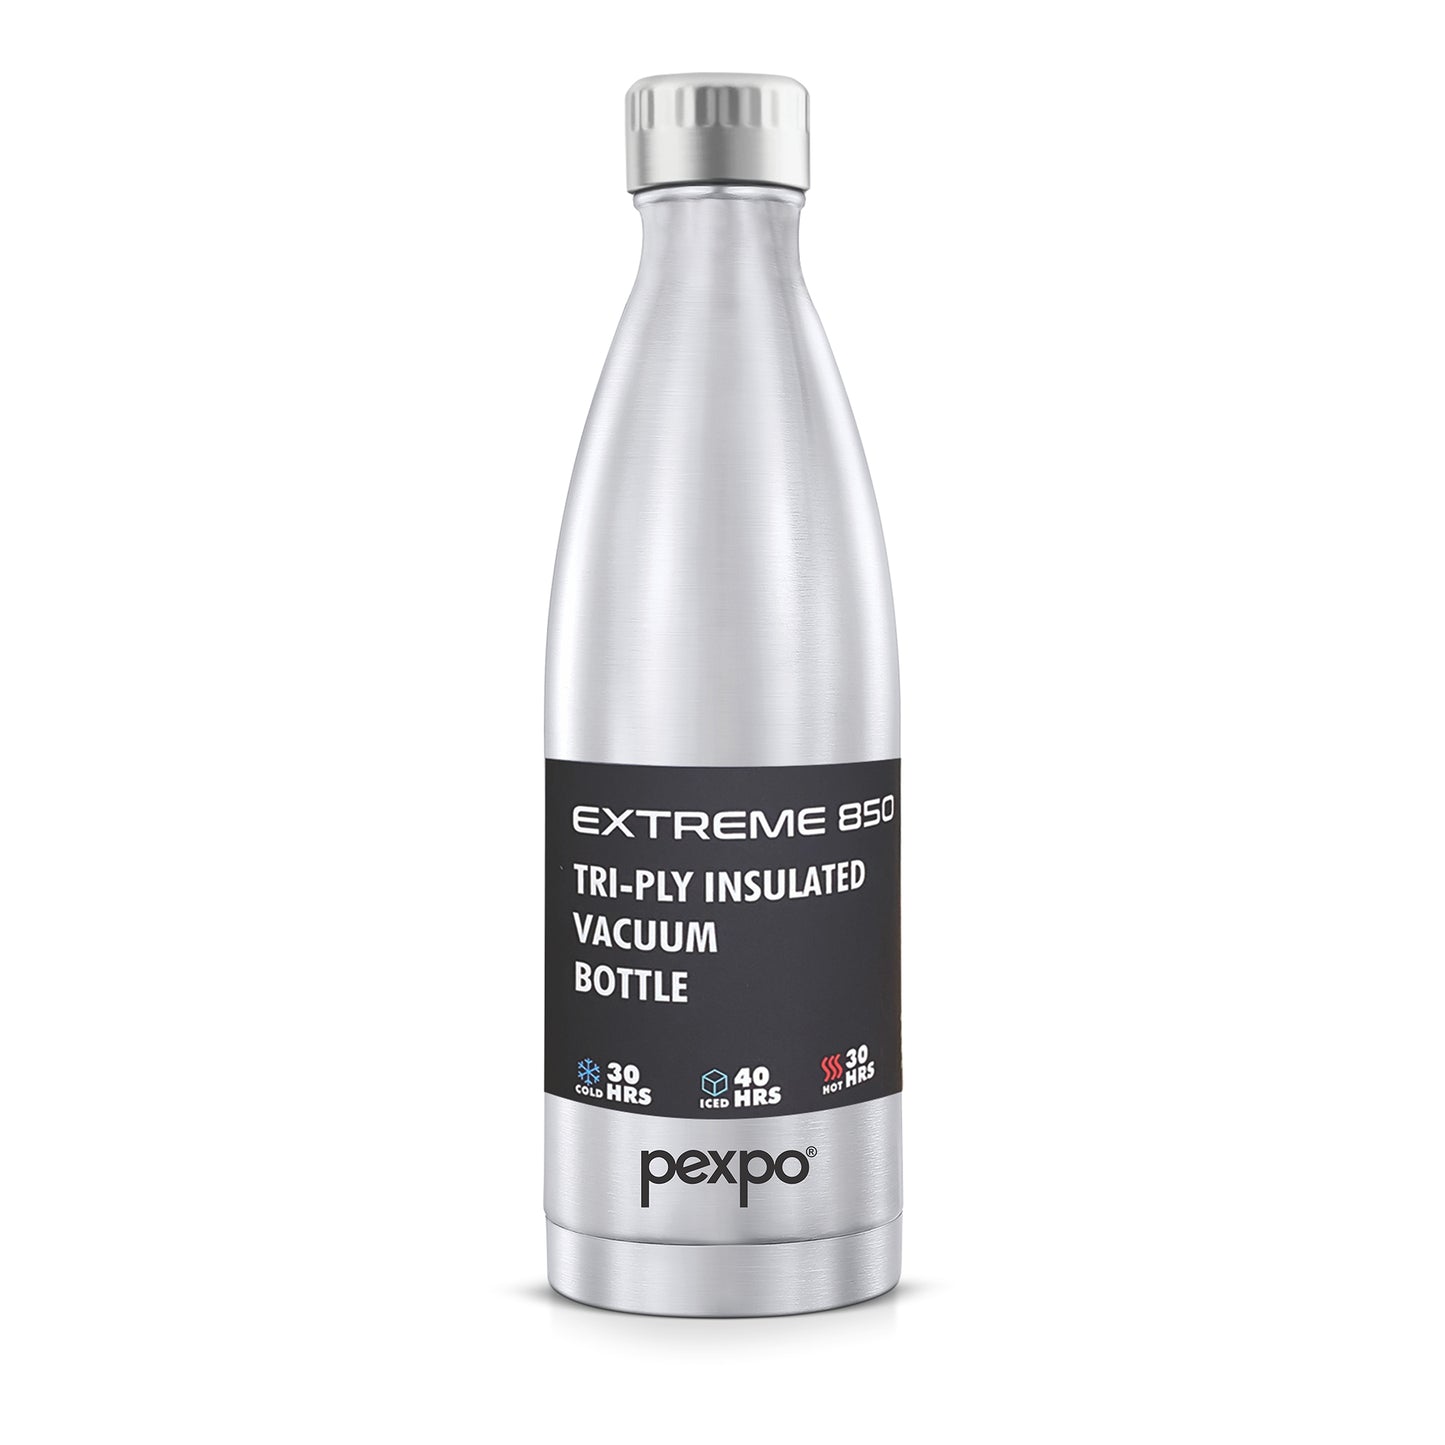 Pexpo Extreme - Stainless Steel Hot and Cold Vacuum Insulated Bottle | Lightweight & Keeps Drinks Hot/Cold for 30+ Hours